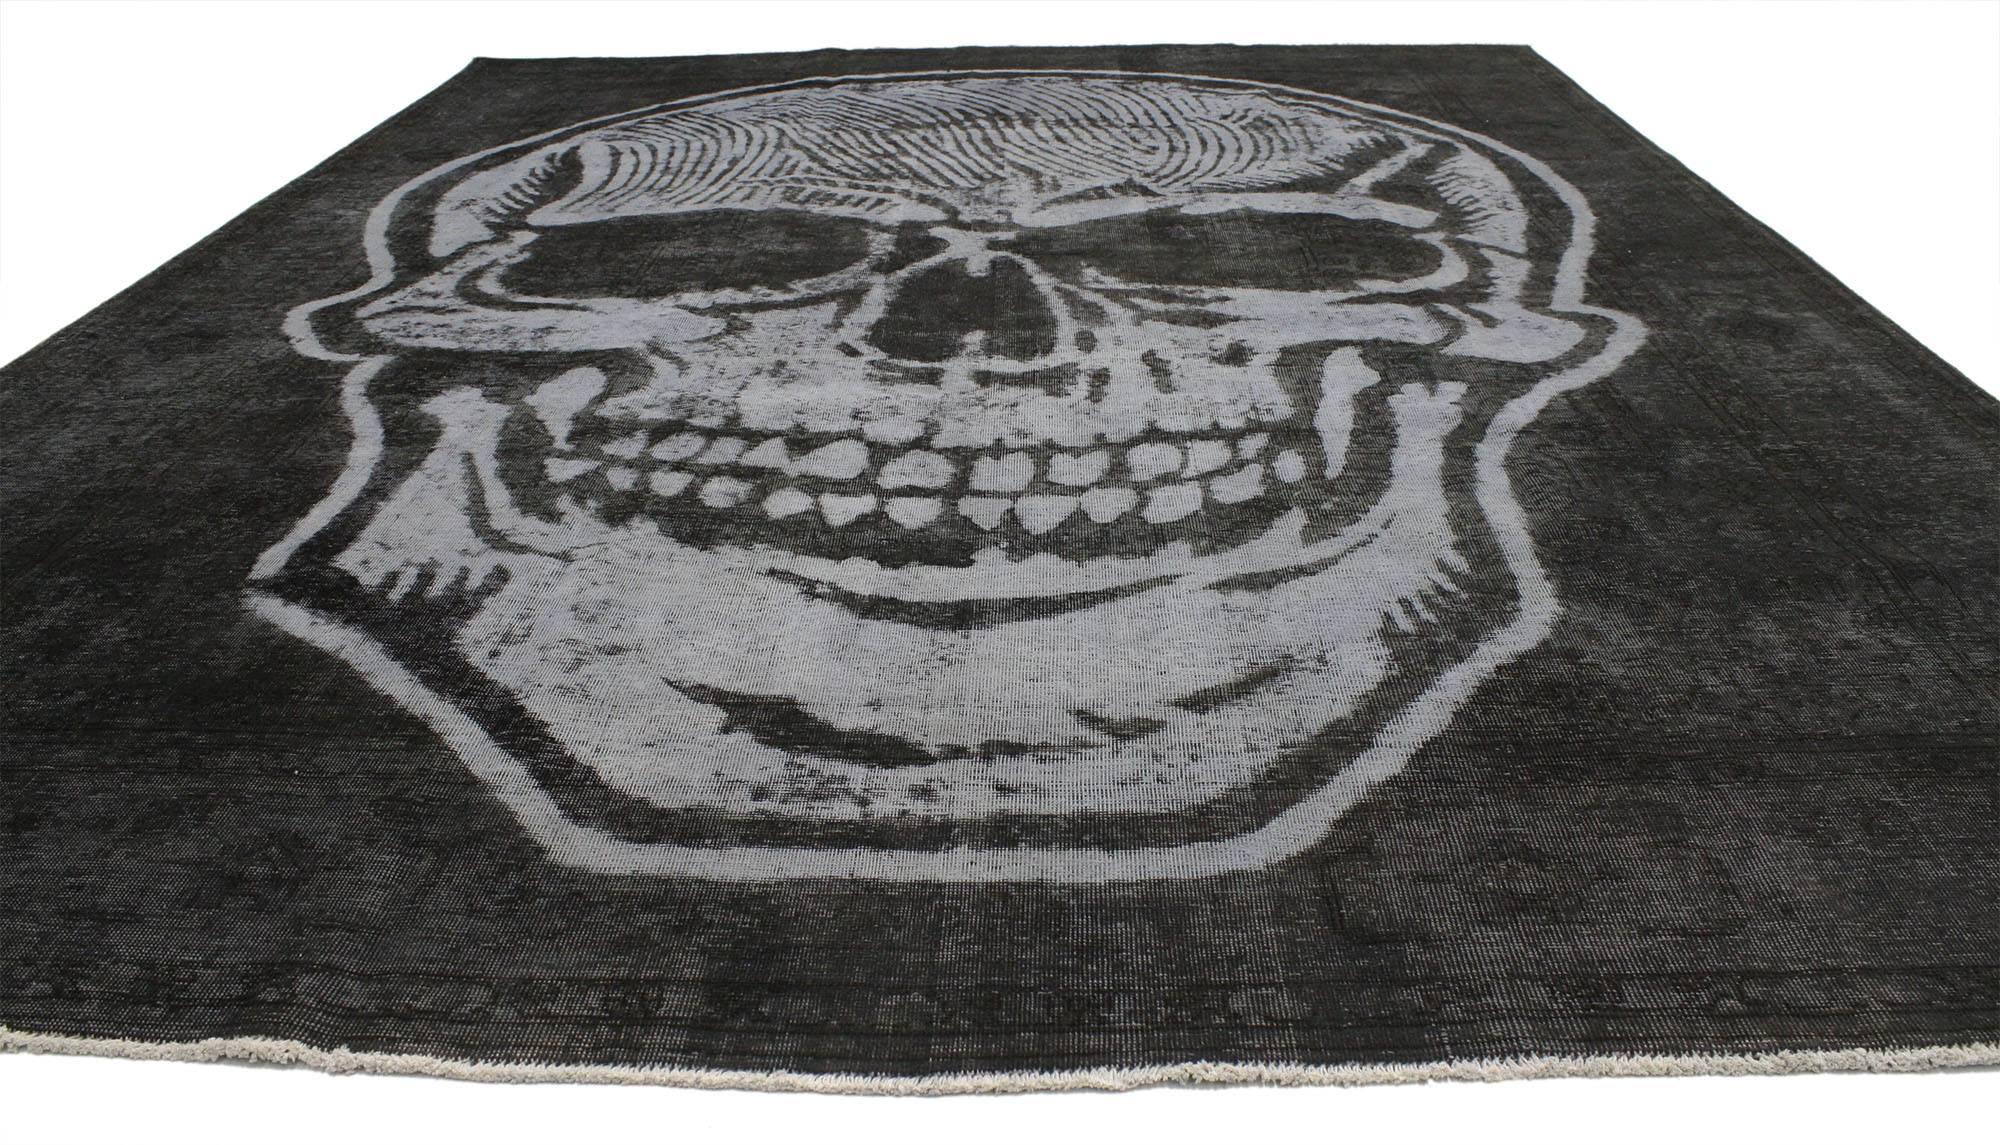 Steampunk Distressed Vintage Overdyed Skull Rug Inspired by Alexander McQueen For Sale